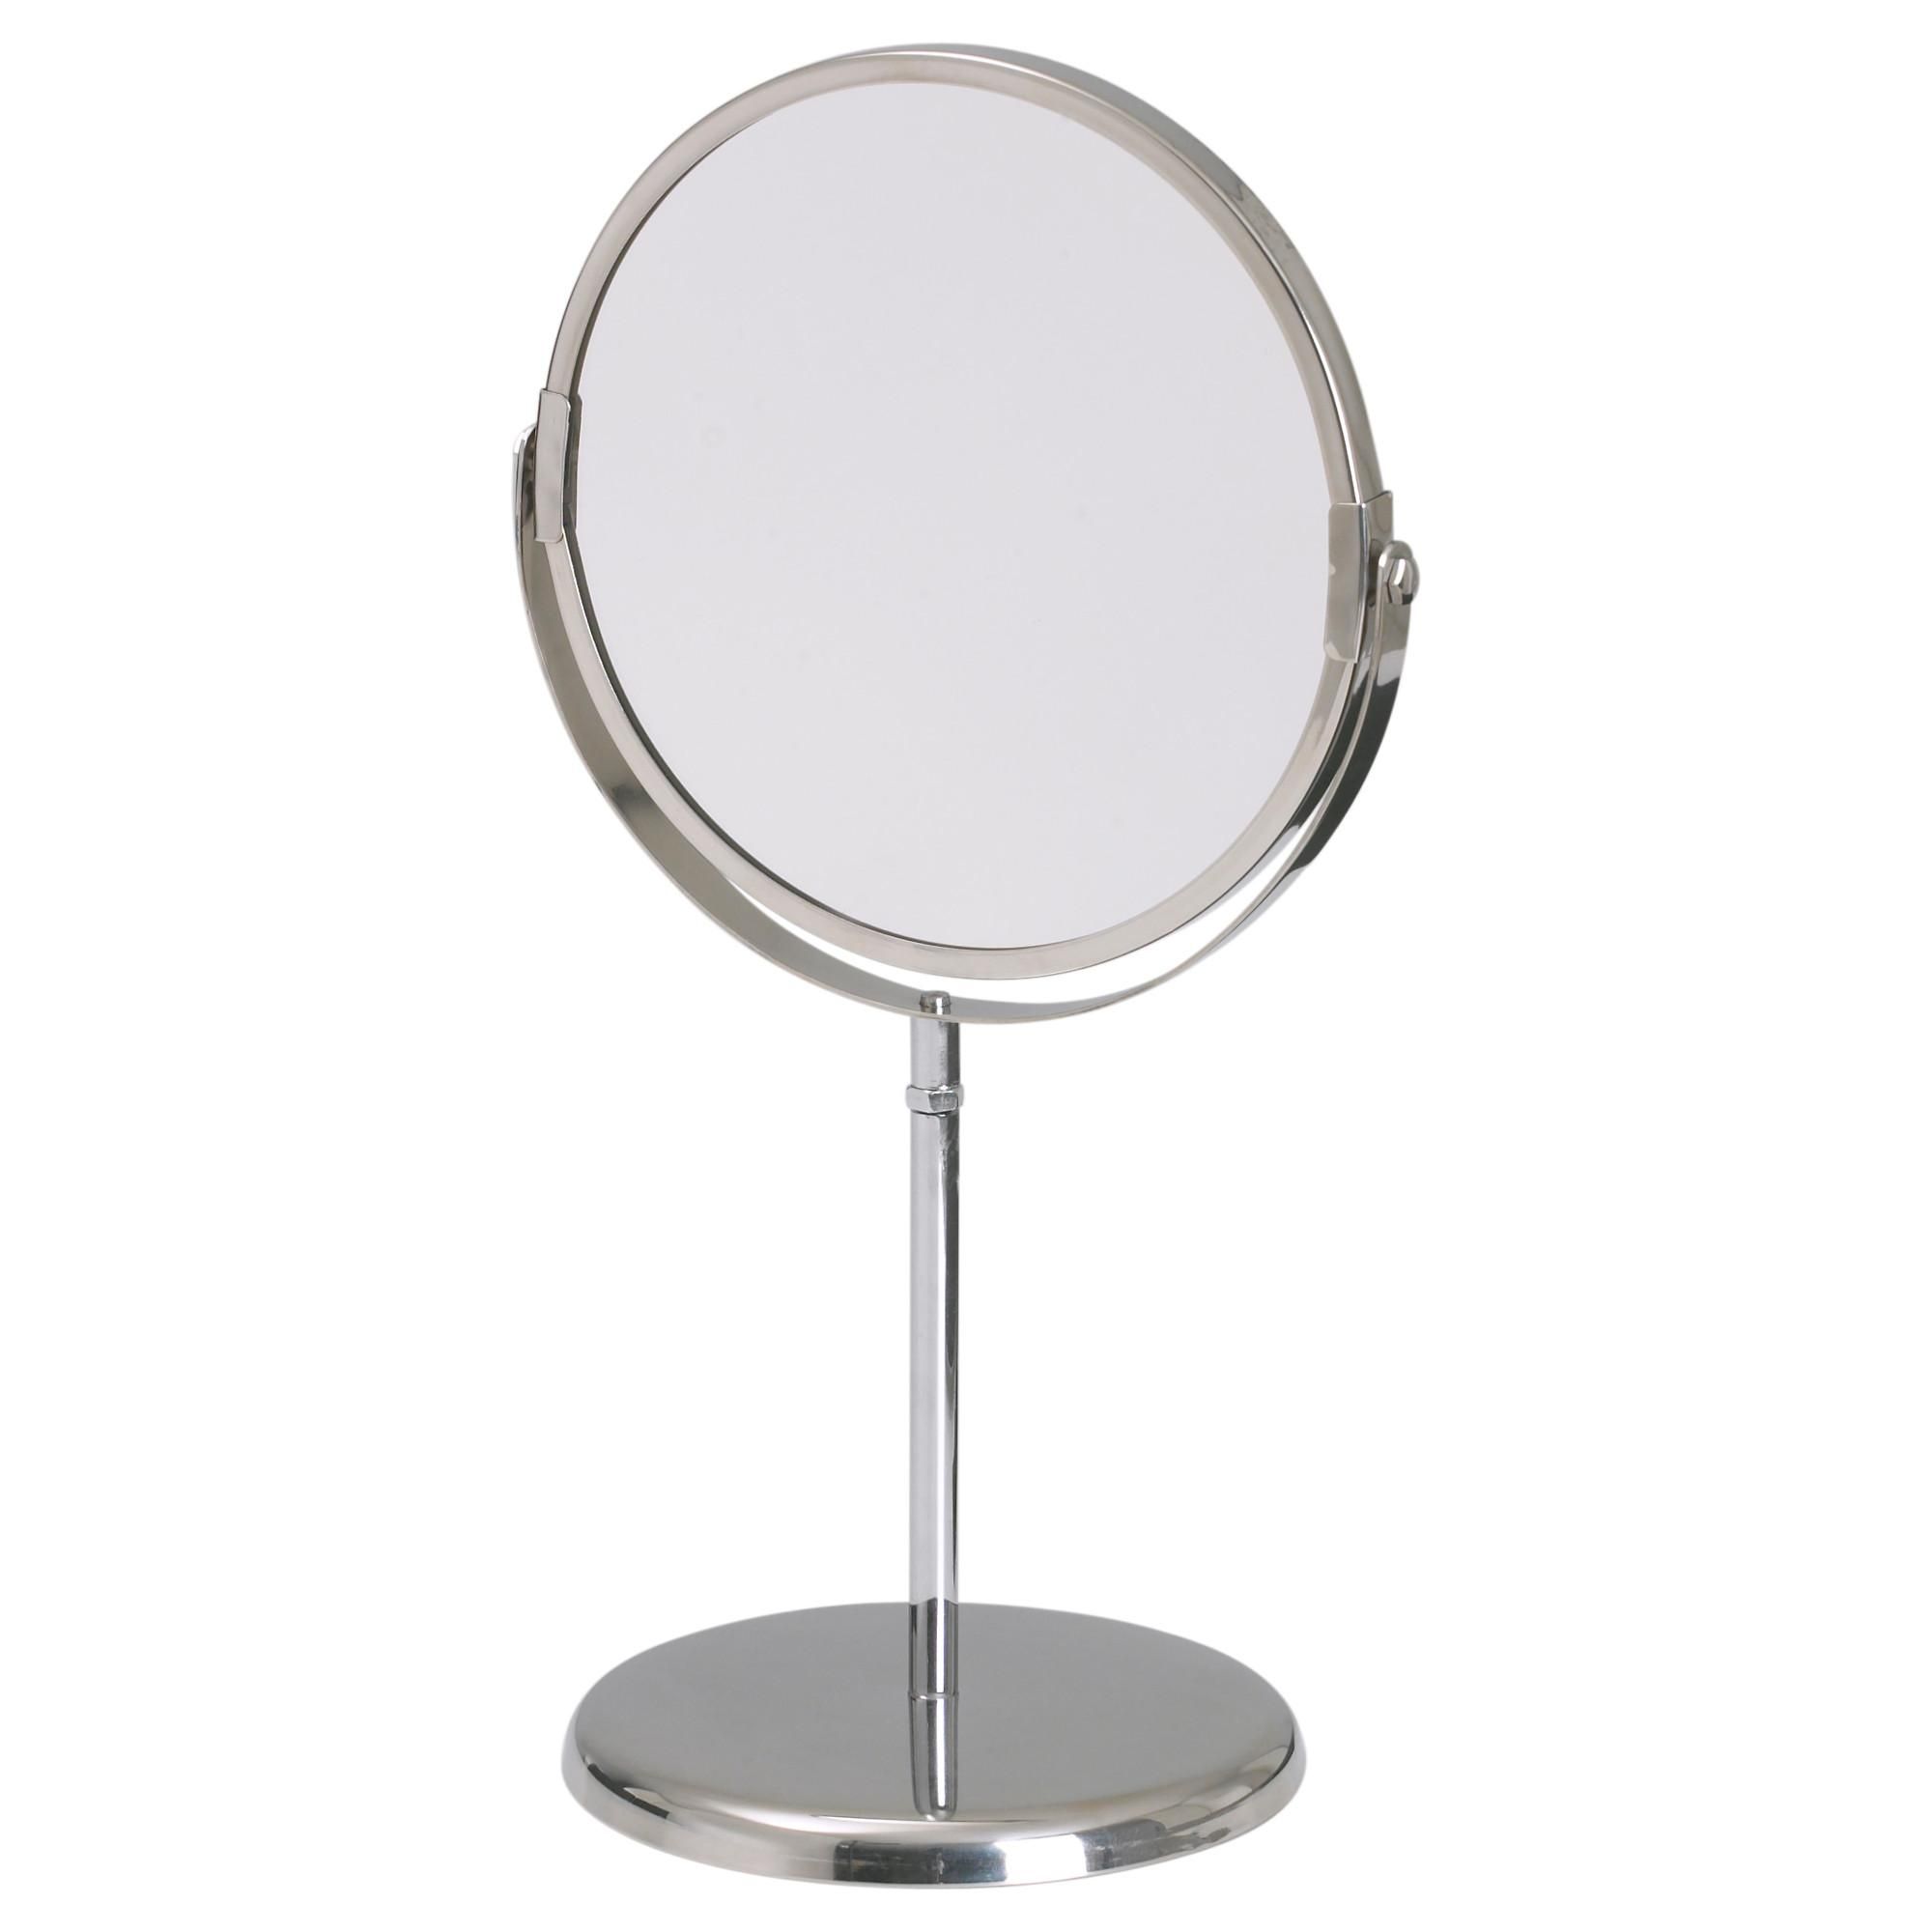 Trensum Mirror – Ikea For Standing Table Mirror (View 18 of 20)